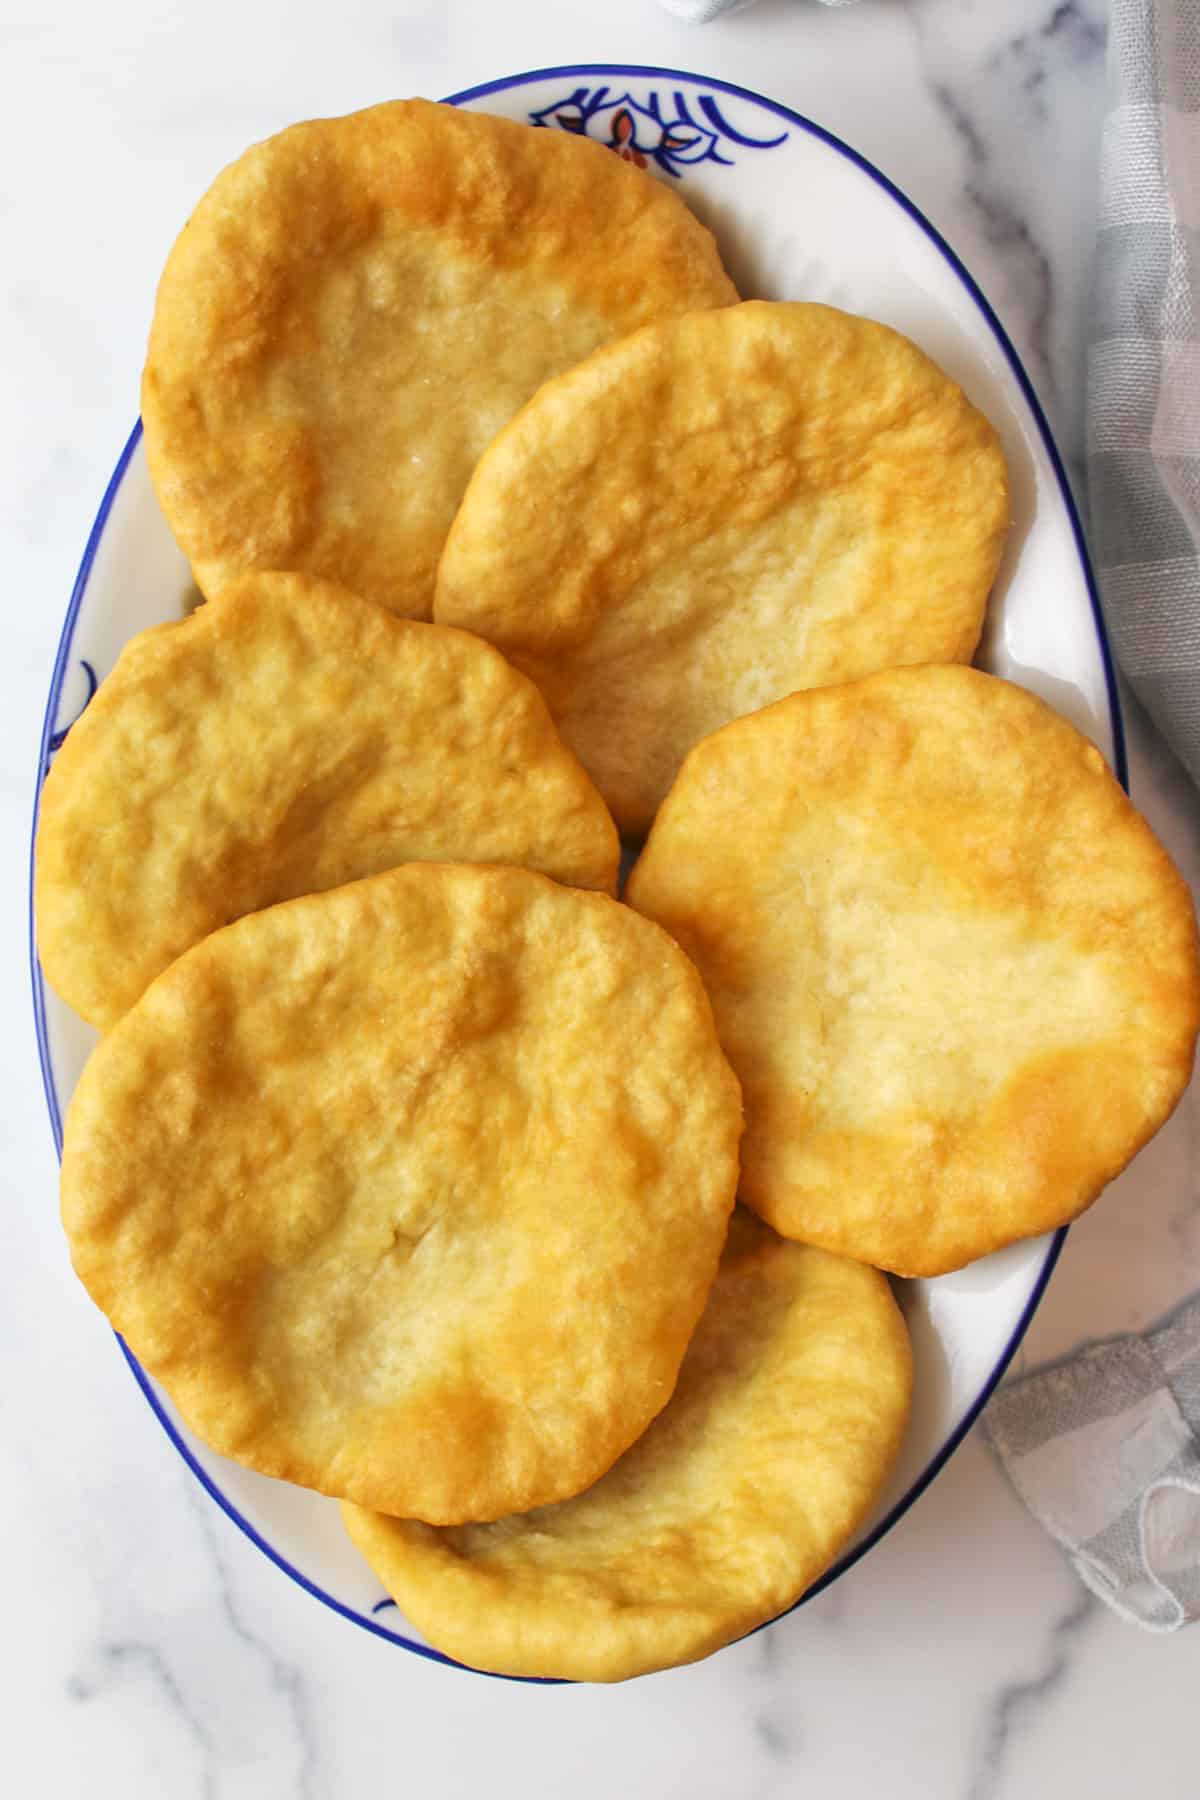 a dish filled with golden cooked fry bread.